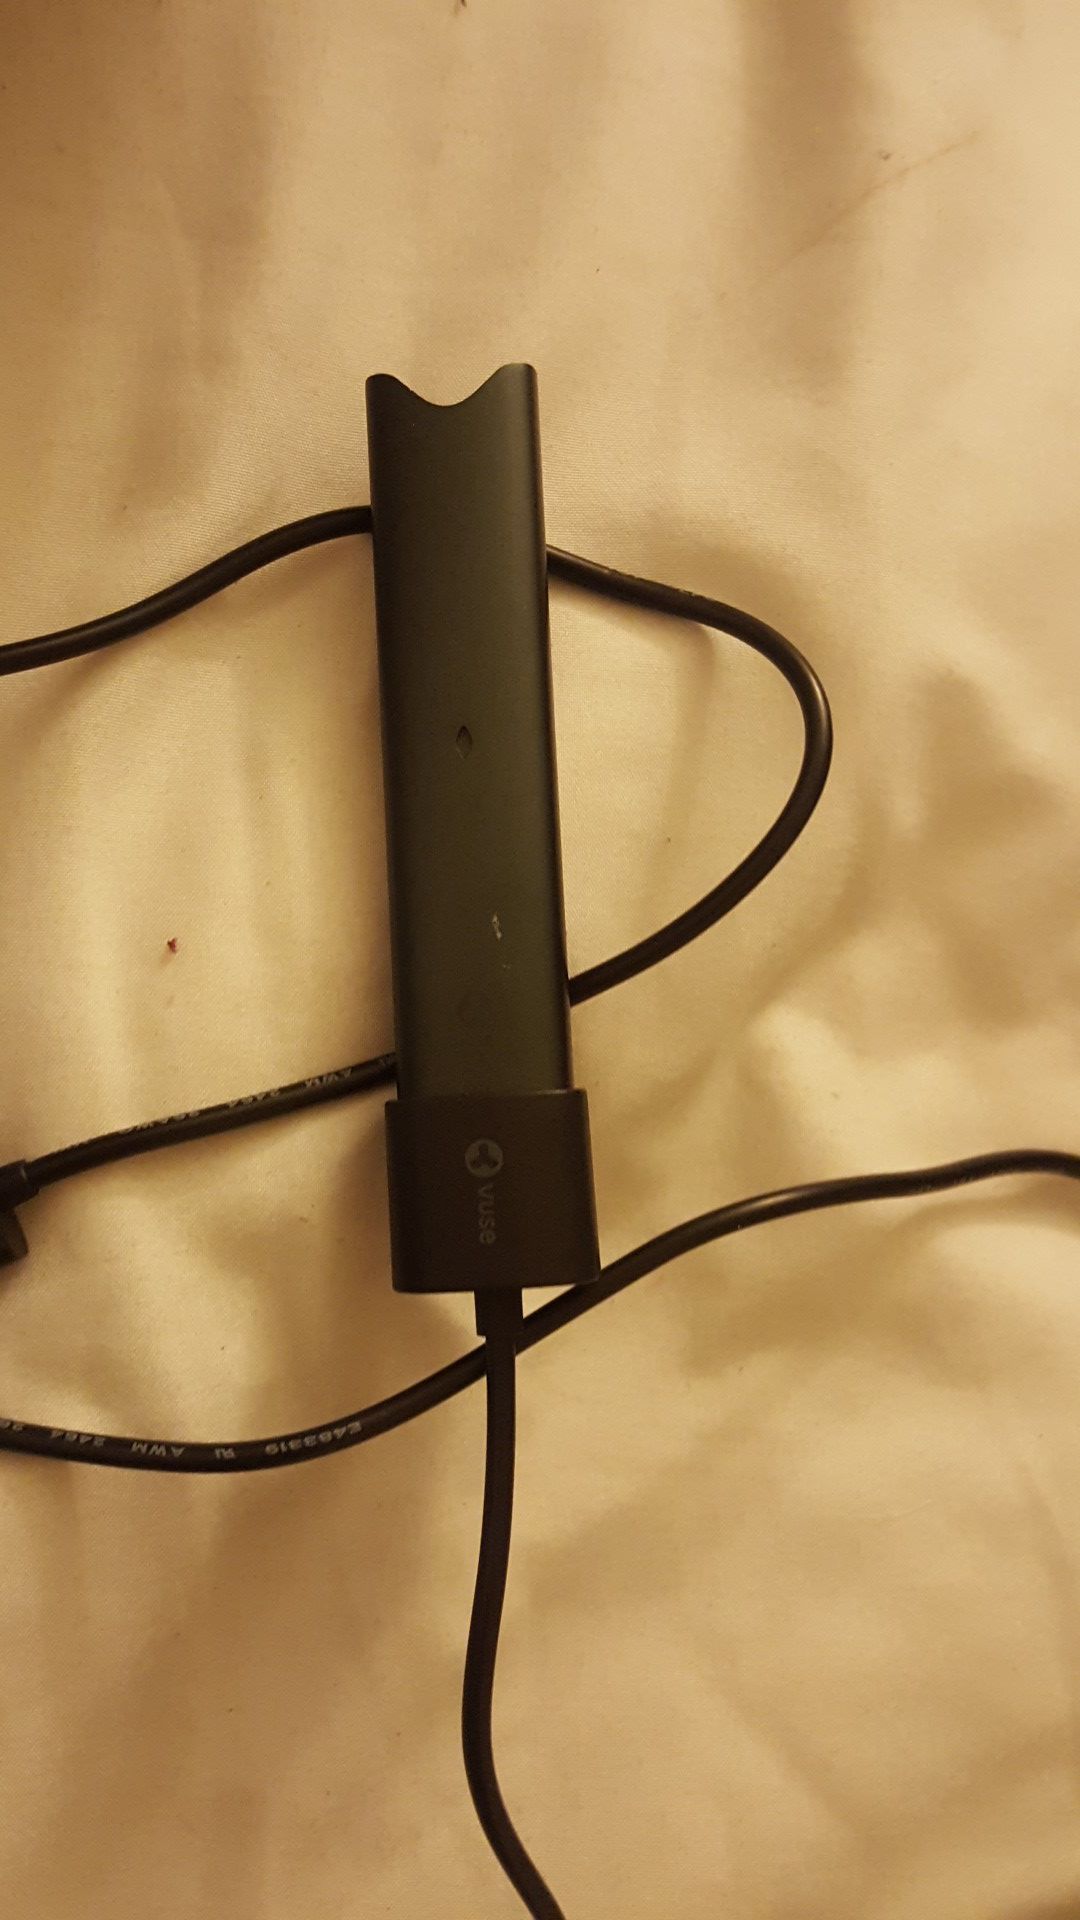 Vuse Alto with Charger (no pods) for Sale in Covina, CA - OfferUp